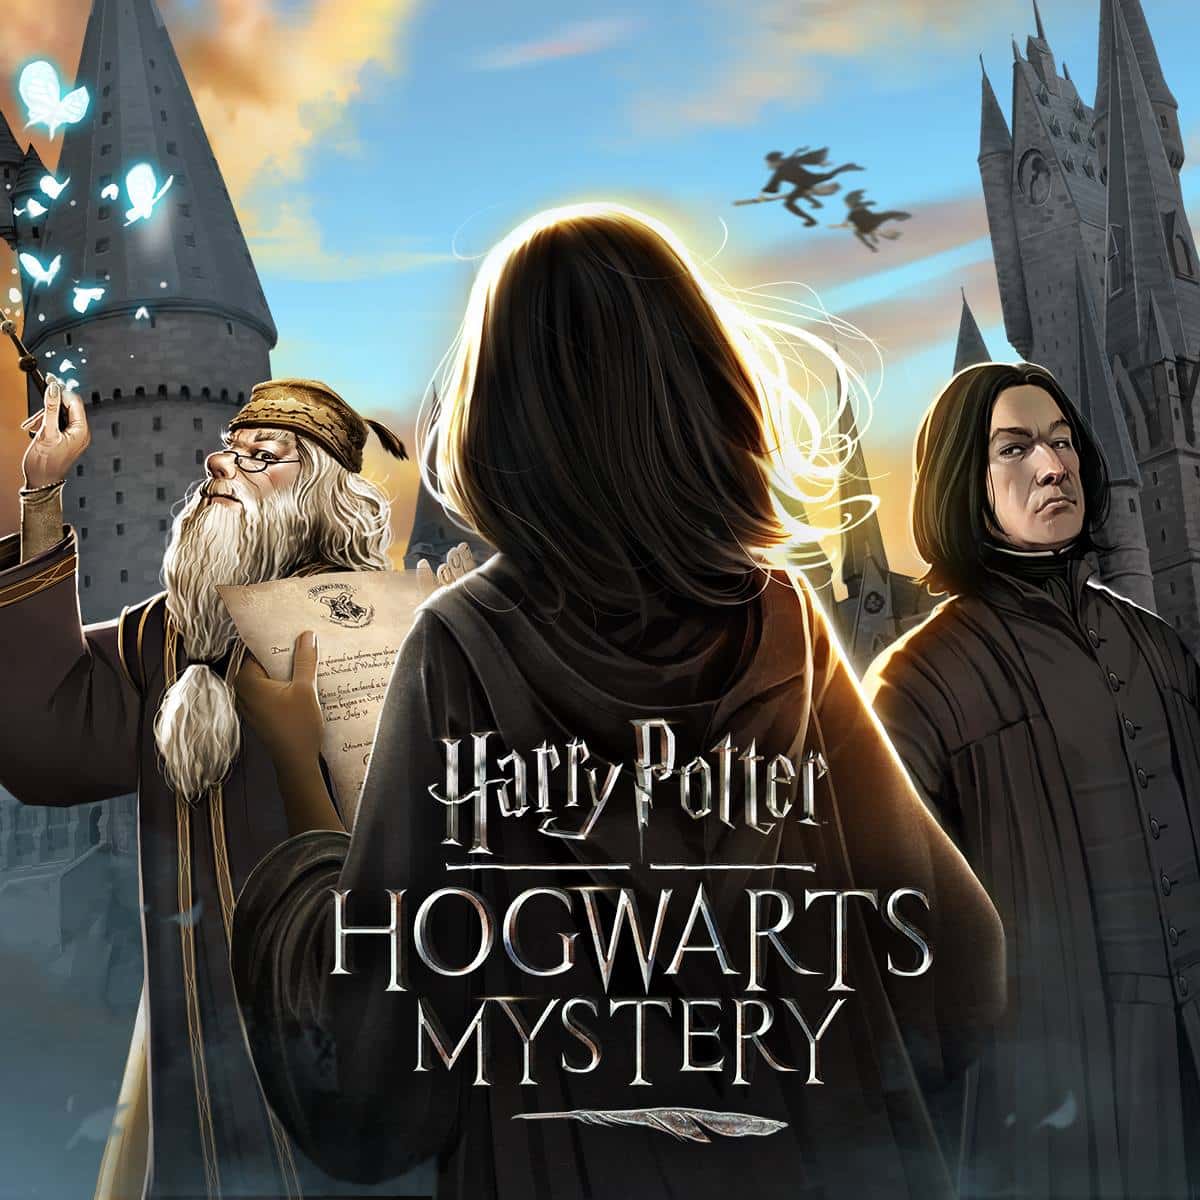 Watch The New Trailer For Harry Potter: Hogwarts Mystery